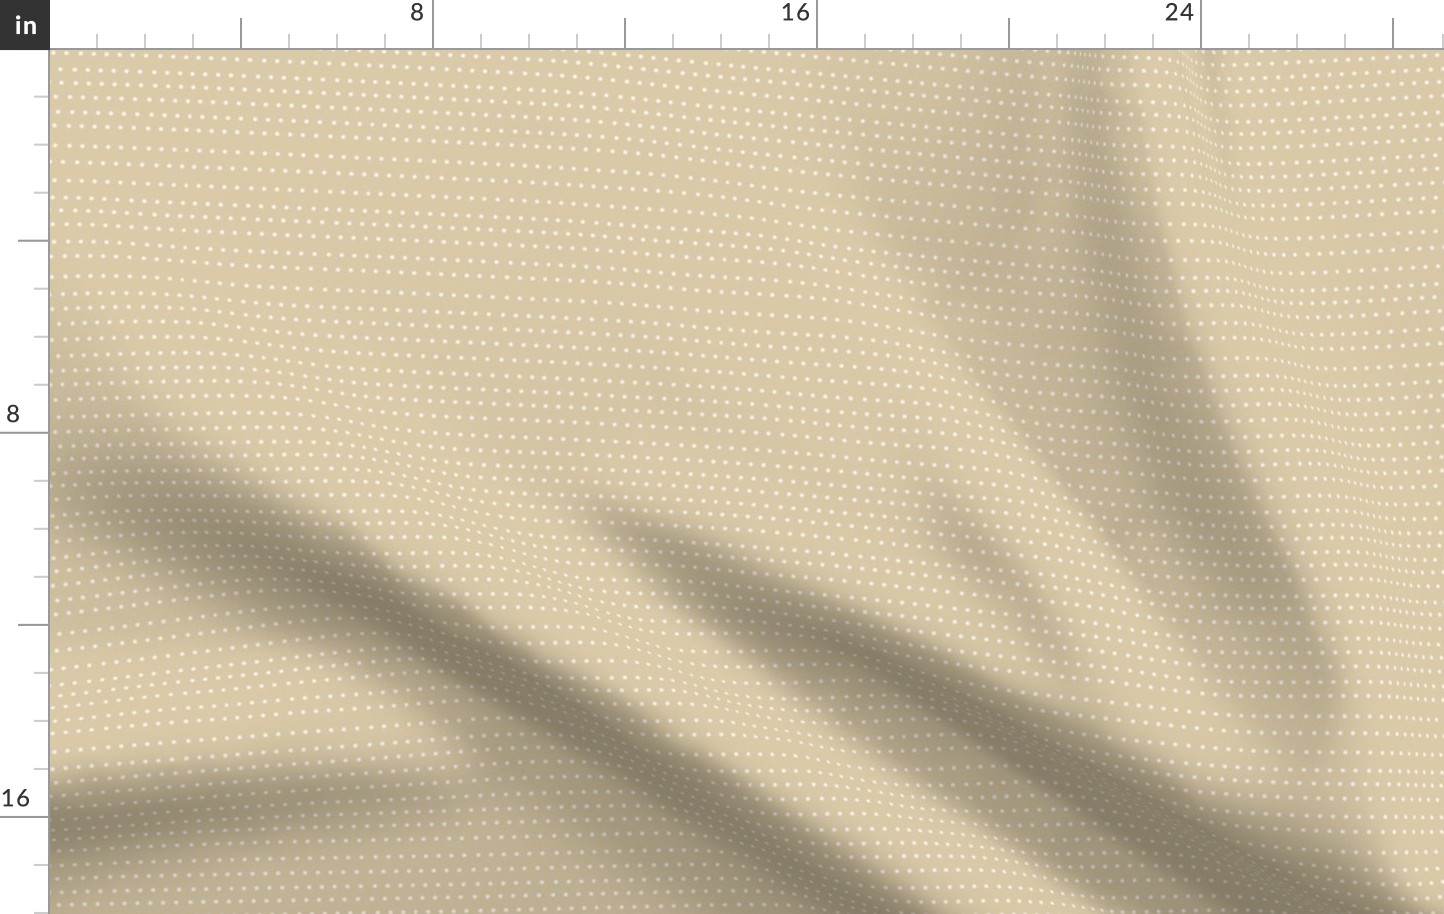 small- polka dots in lines on lighter sand - small scale 